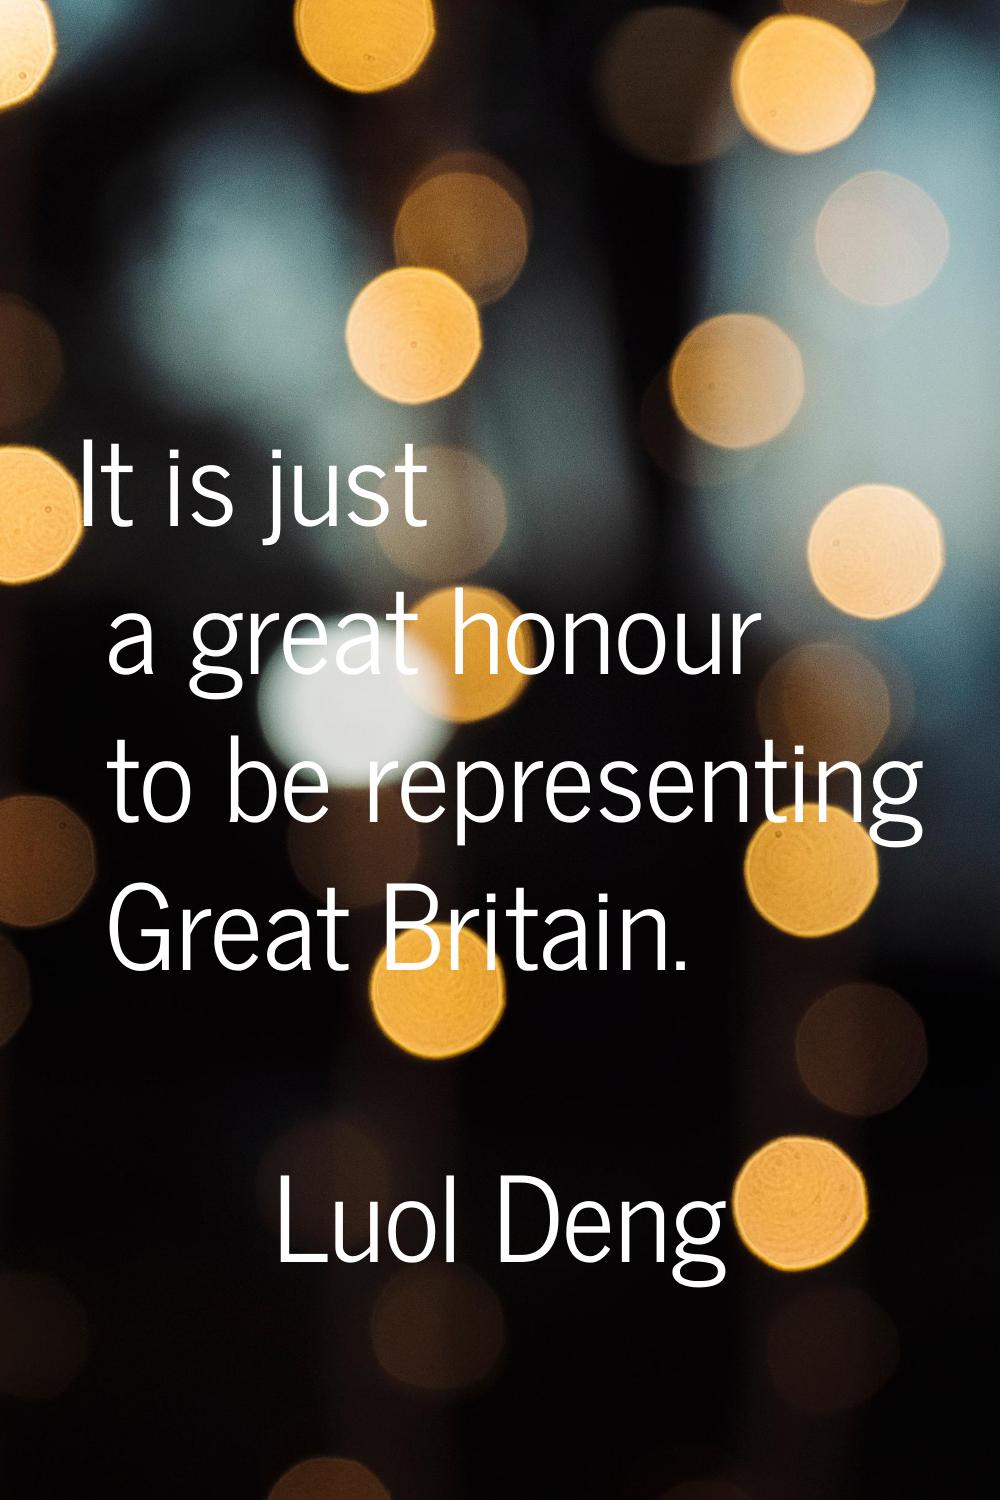 It is just a great honour to be representing Great Britain.